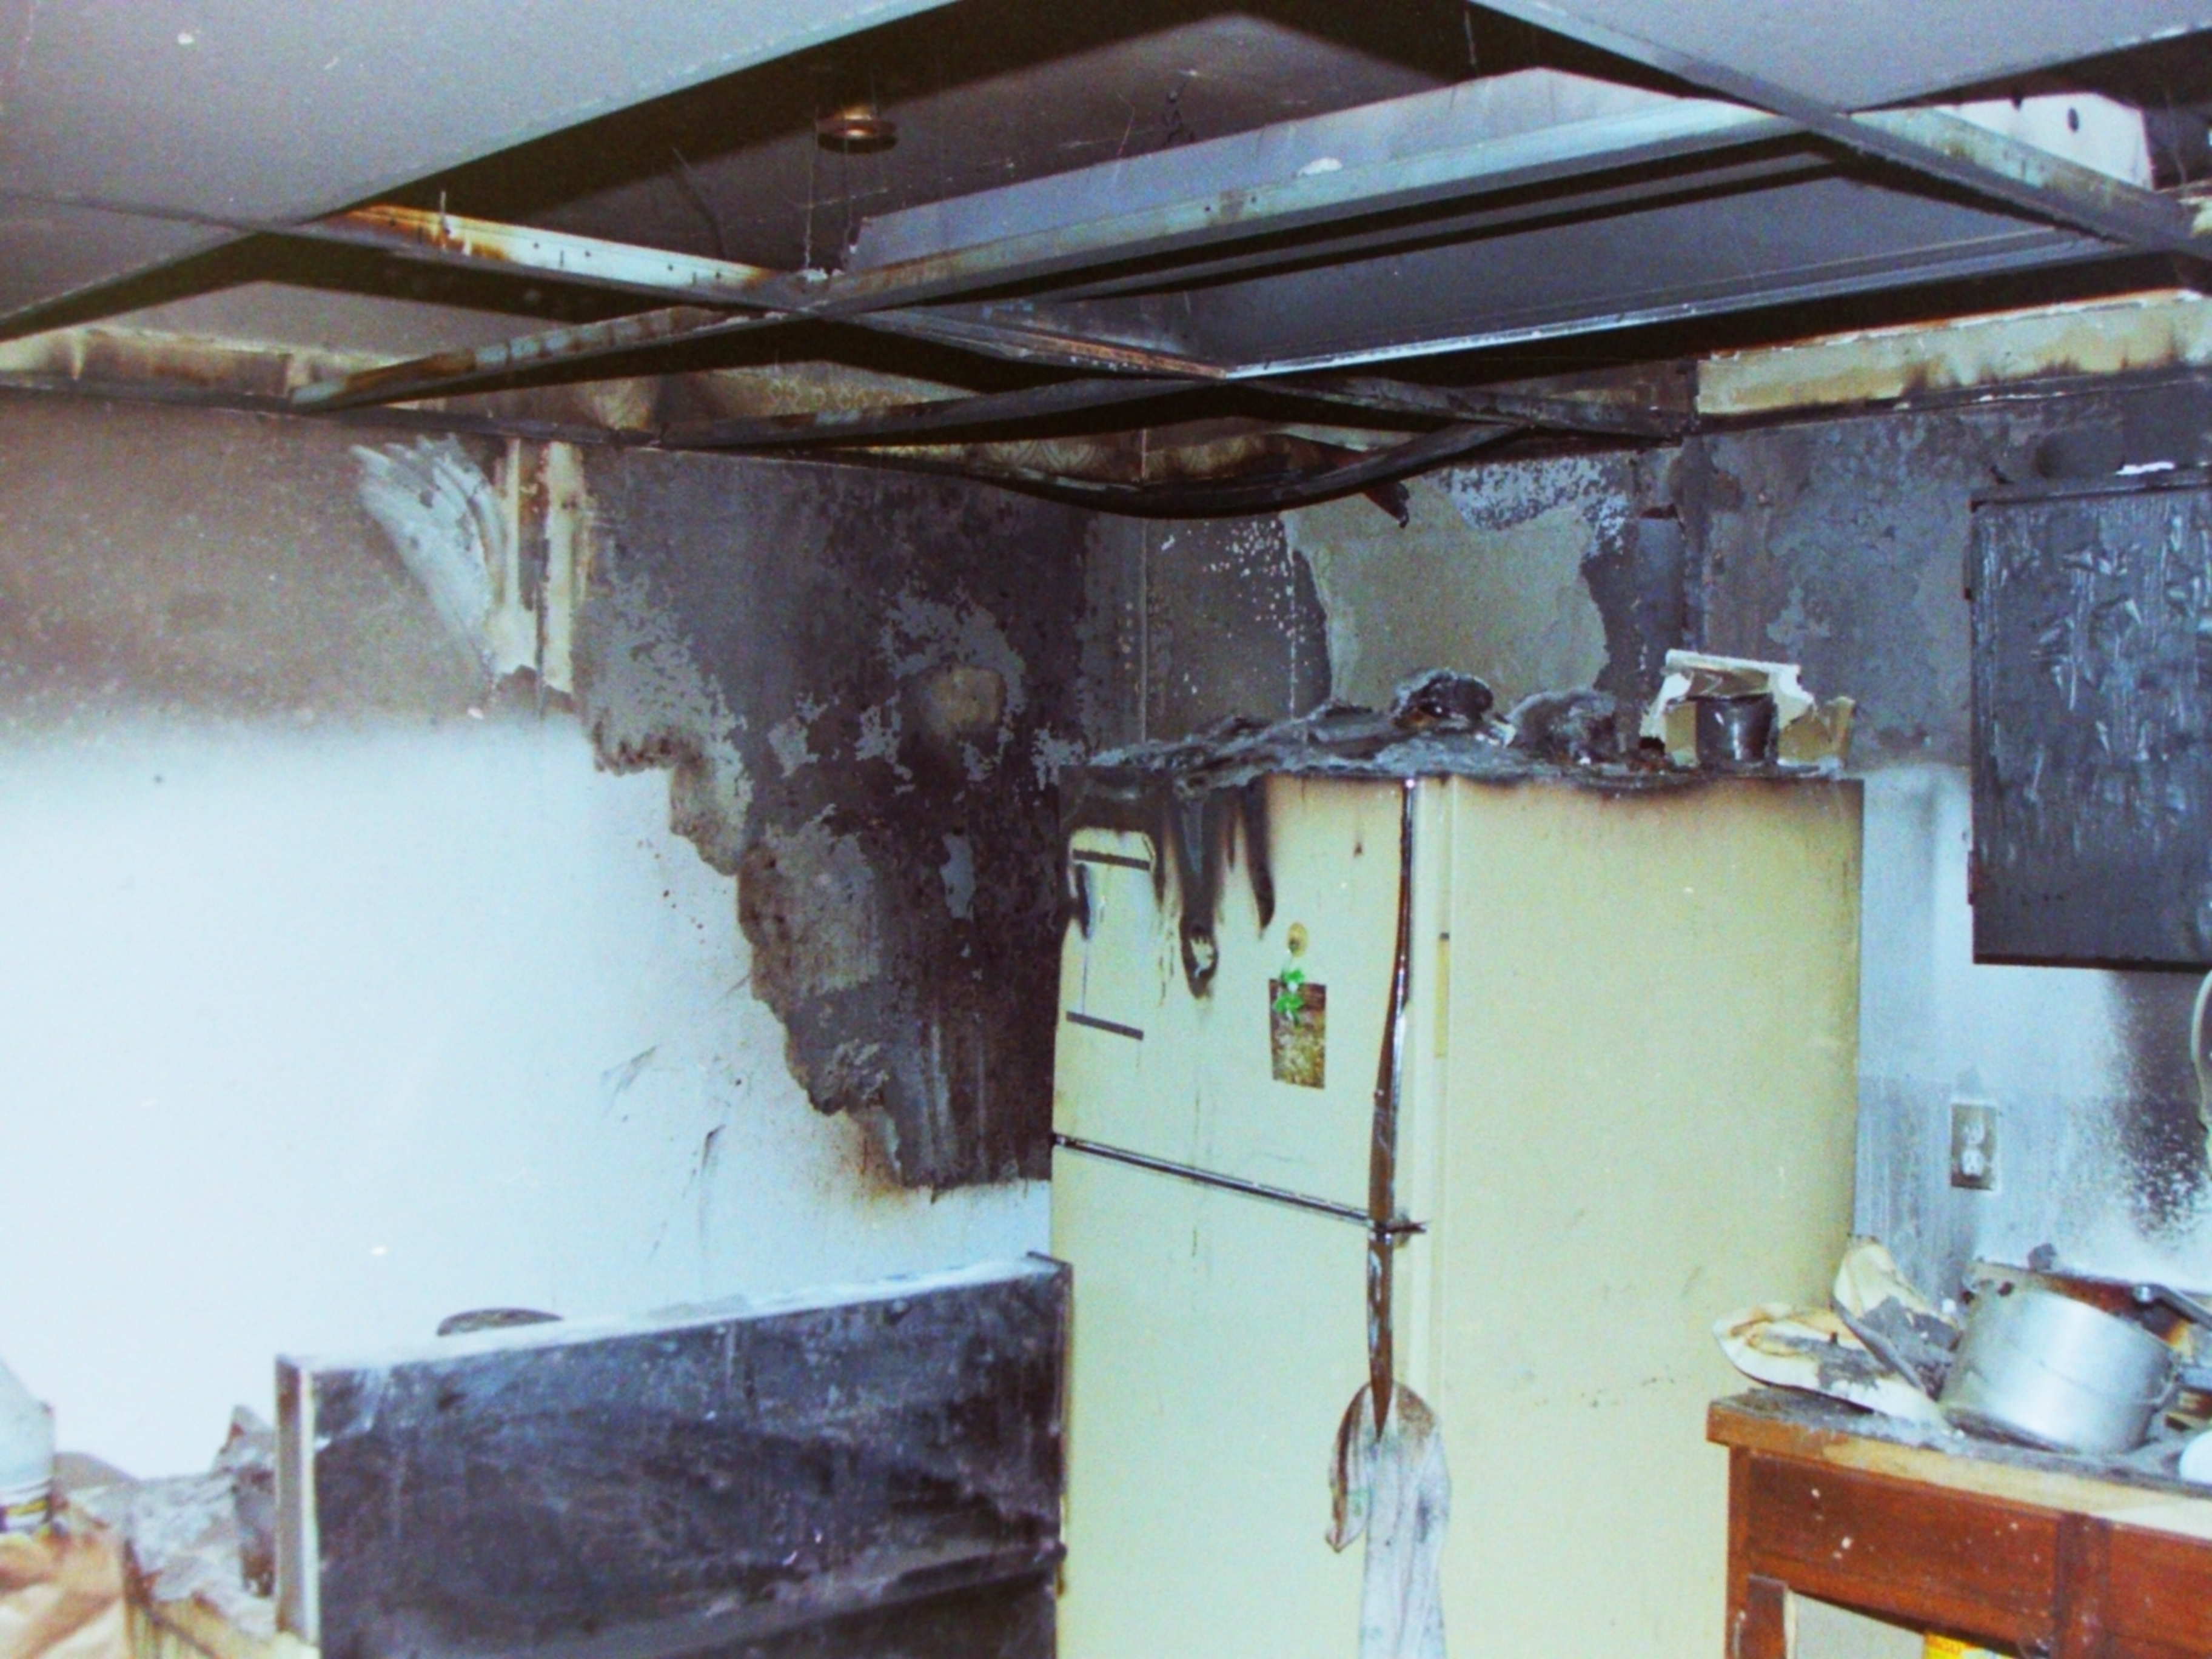 11-20-92  Other - Endwell Fire 5